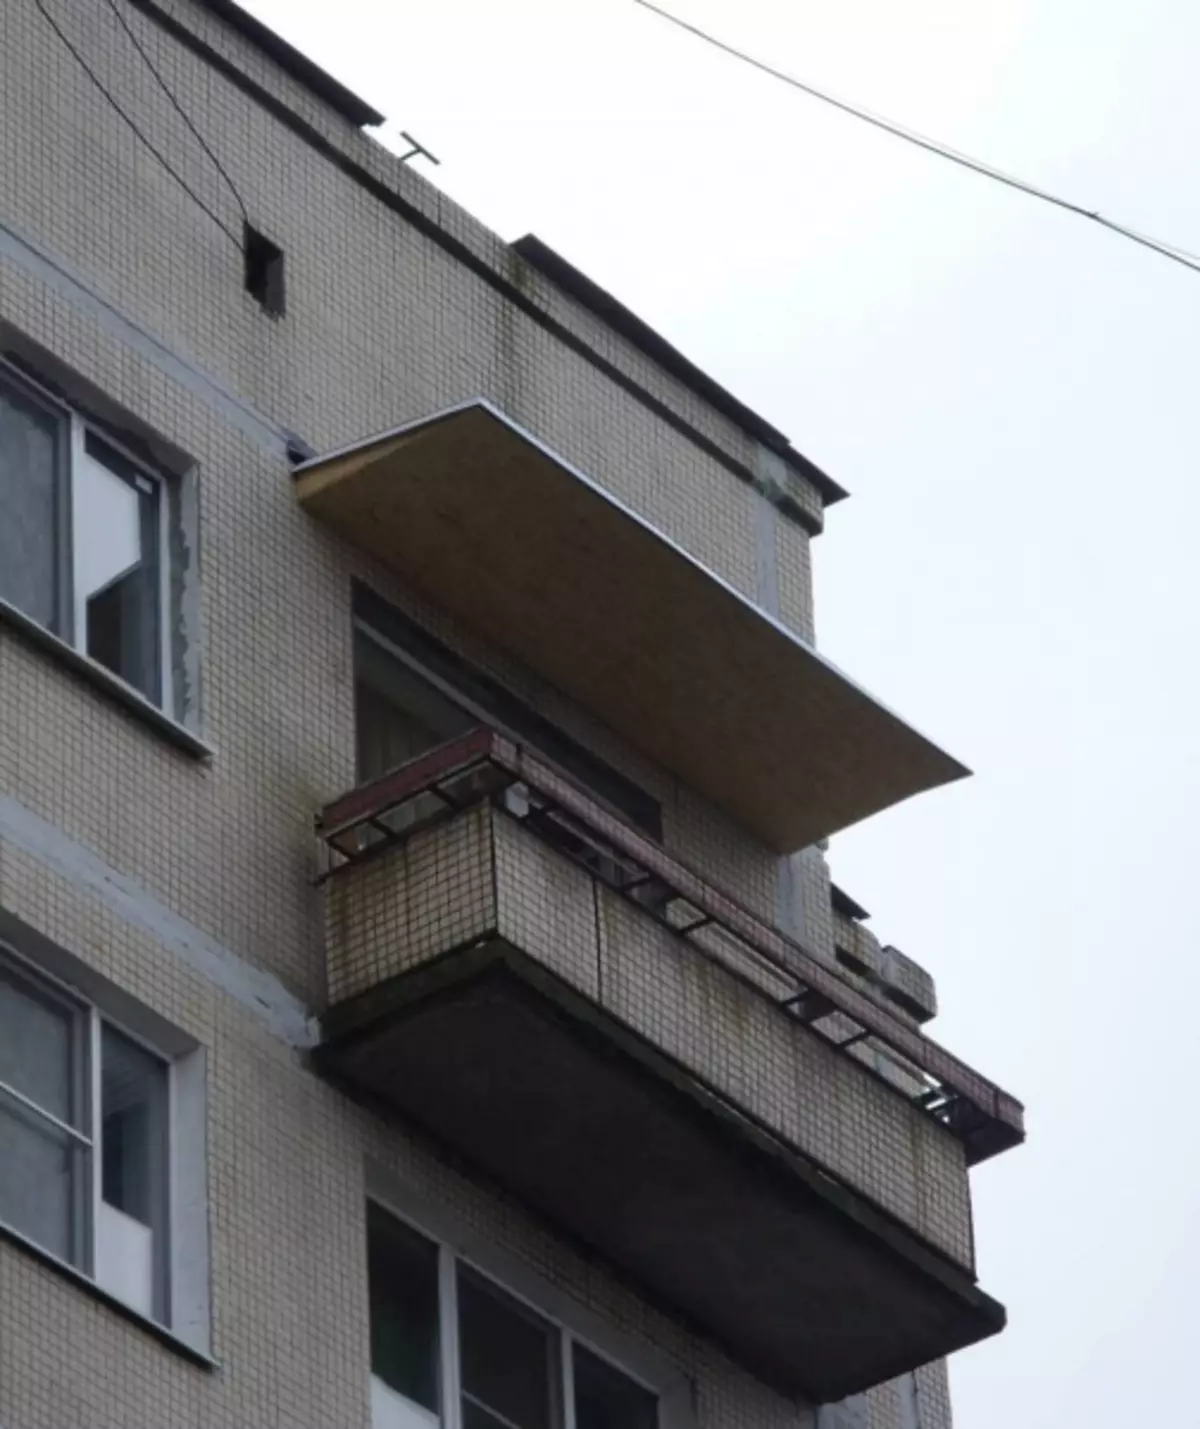 If the balcony is flowing from above - what to do and to whom to contact